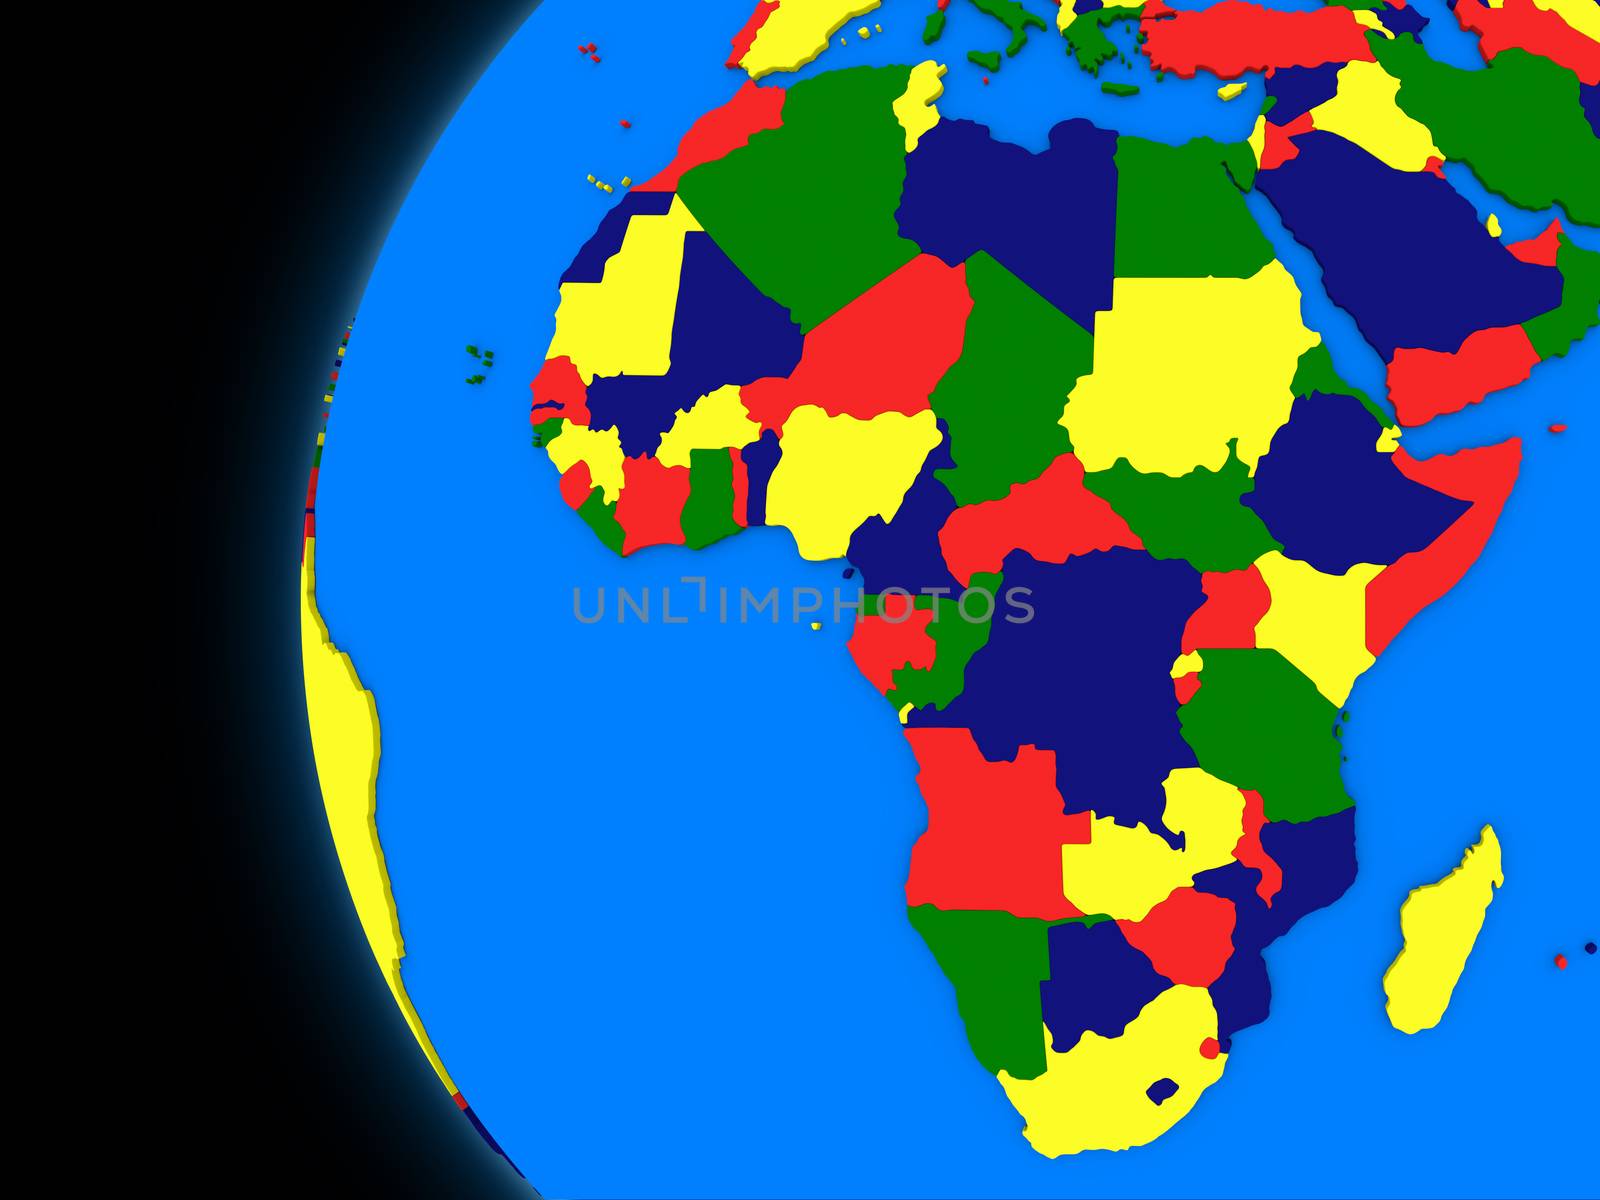 African continent on political Earth by Harvepino